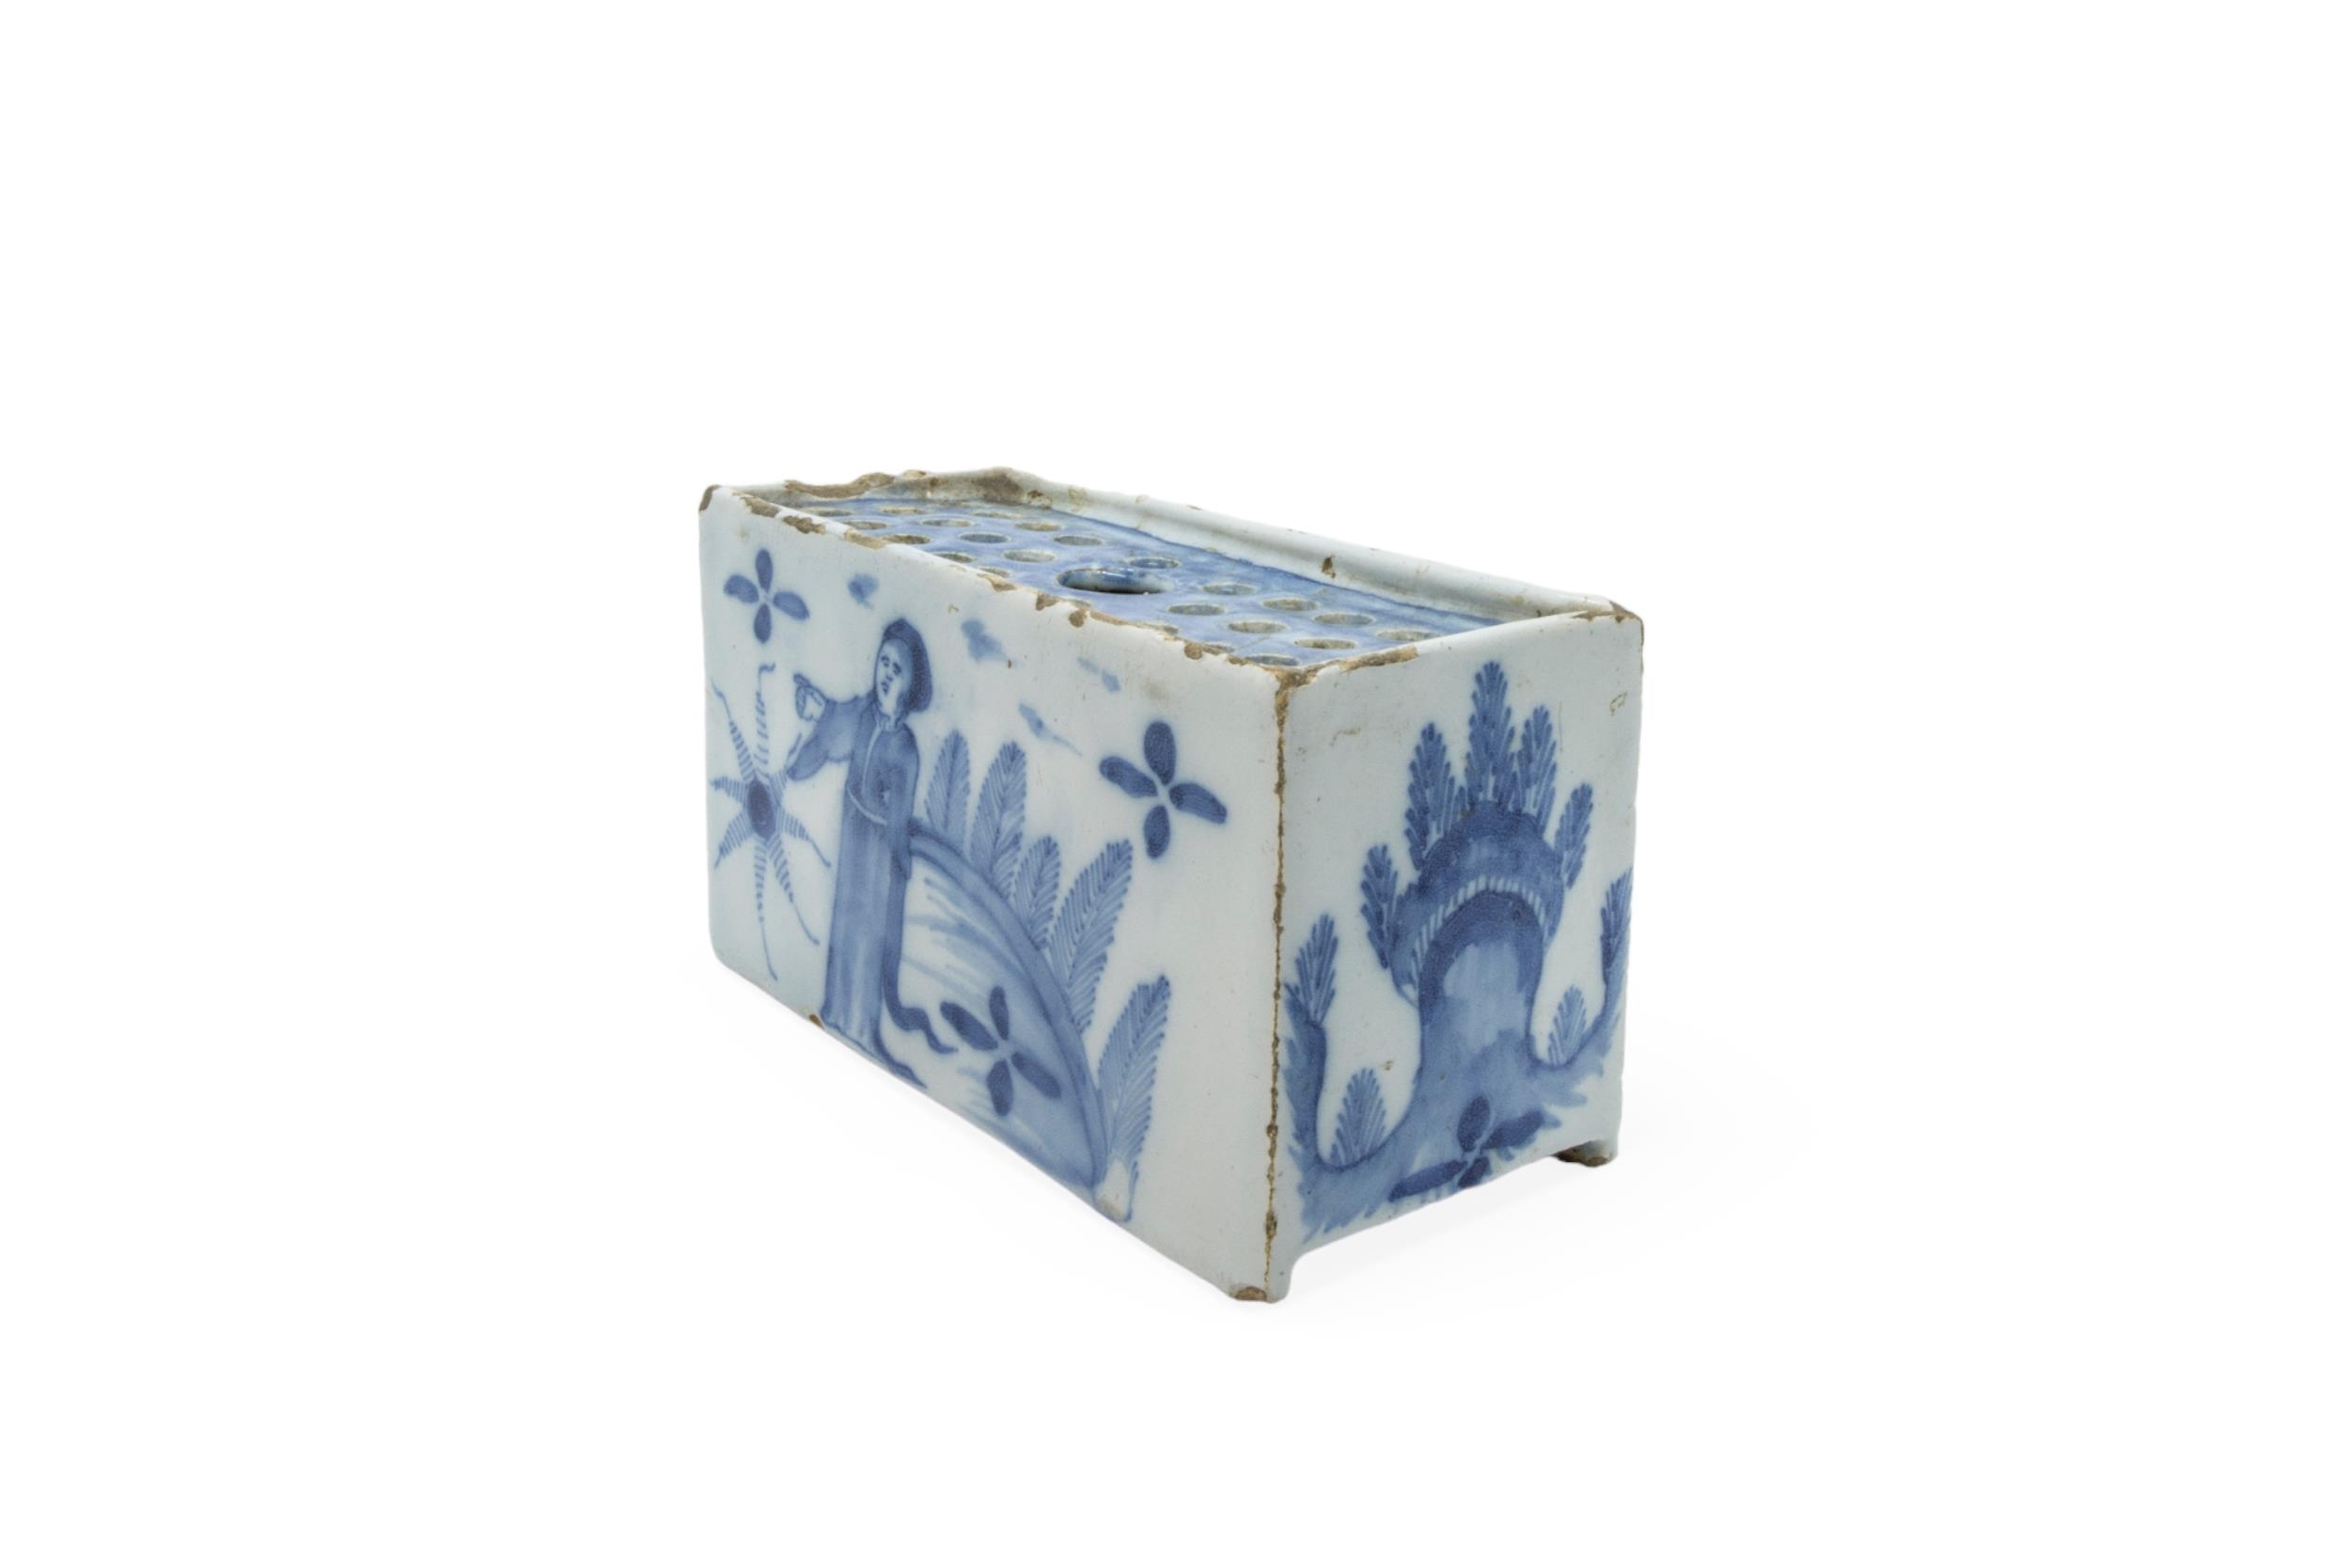 A DELFT FLOWER BRICK 18th century, 14cms wide and a polychrome tile - Image 2 of 3